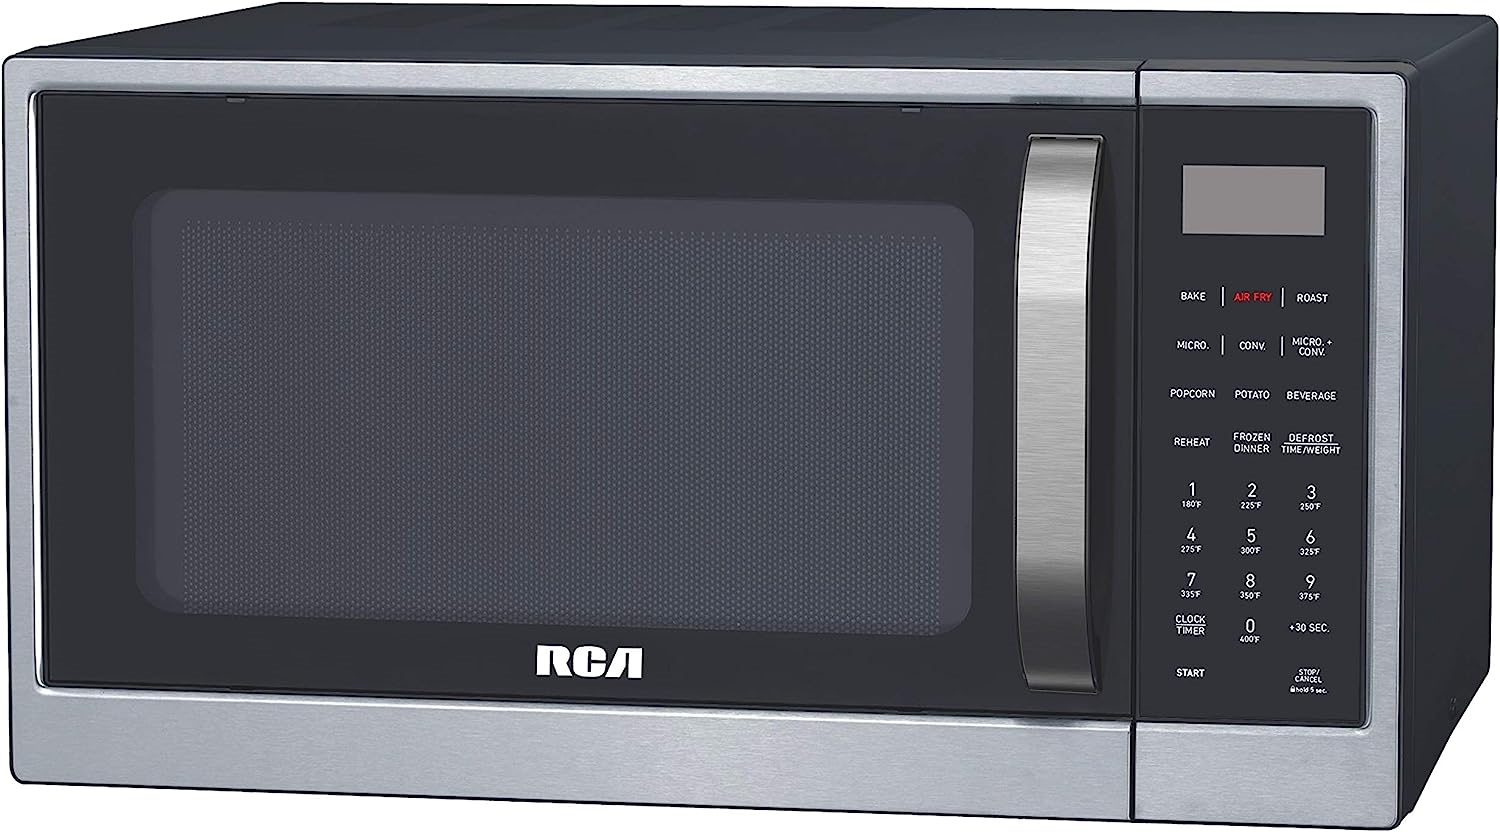 RCA Microwave Toaster Oven | DeviceDaily.com